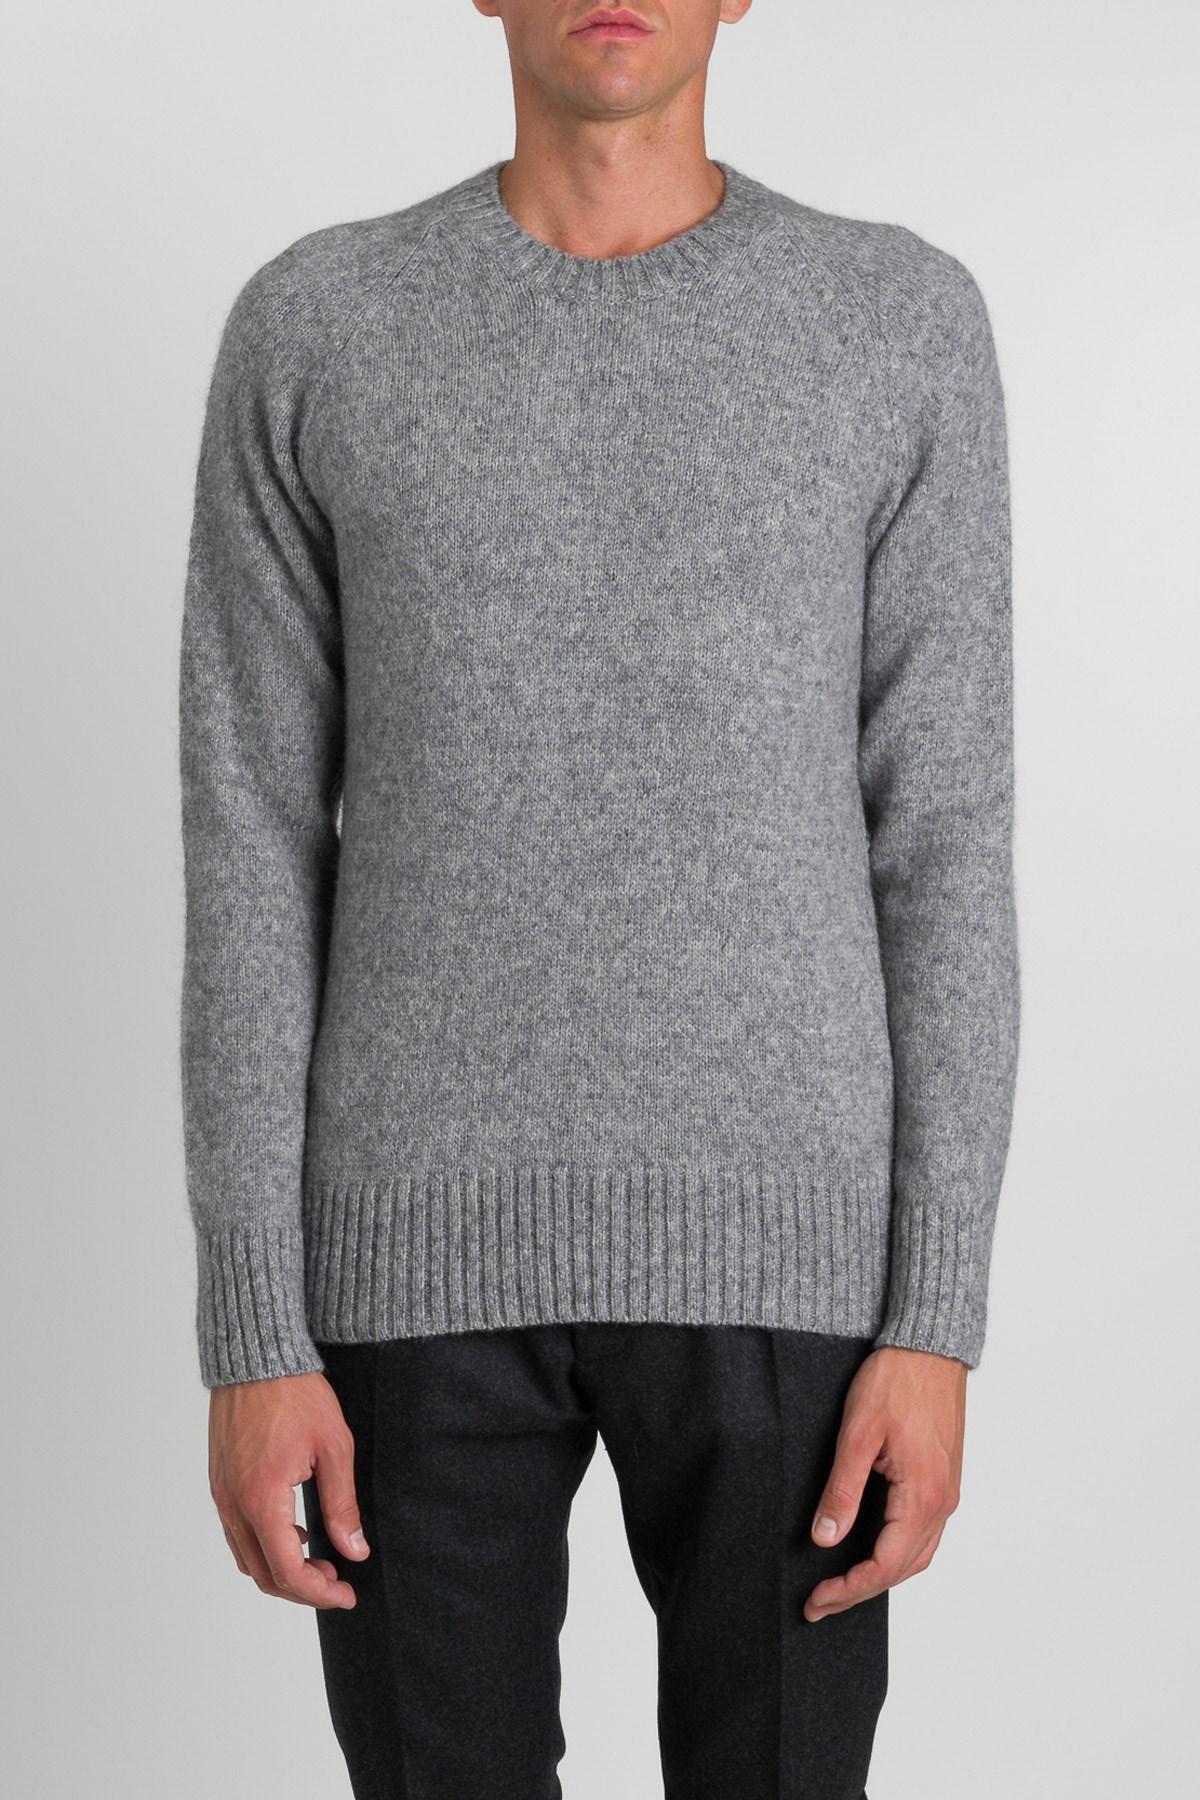 AMI Wool Crewneck Sweater in Gray for Men - Lyst